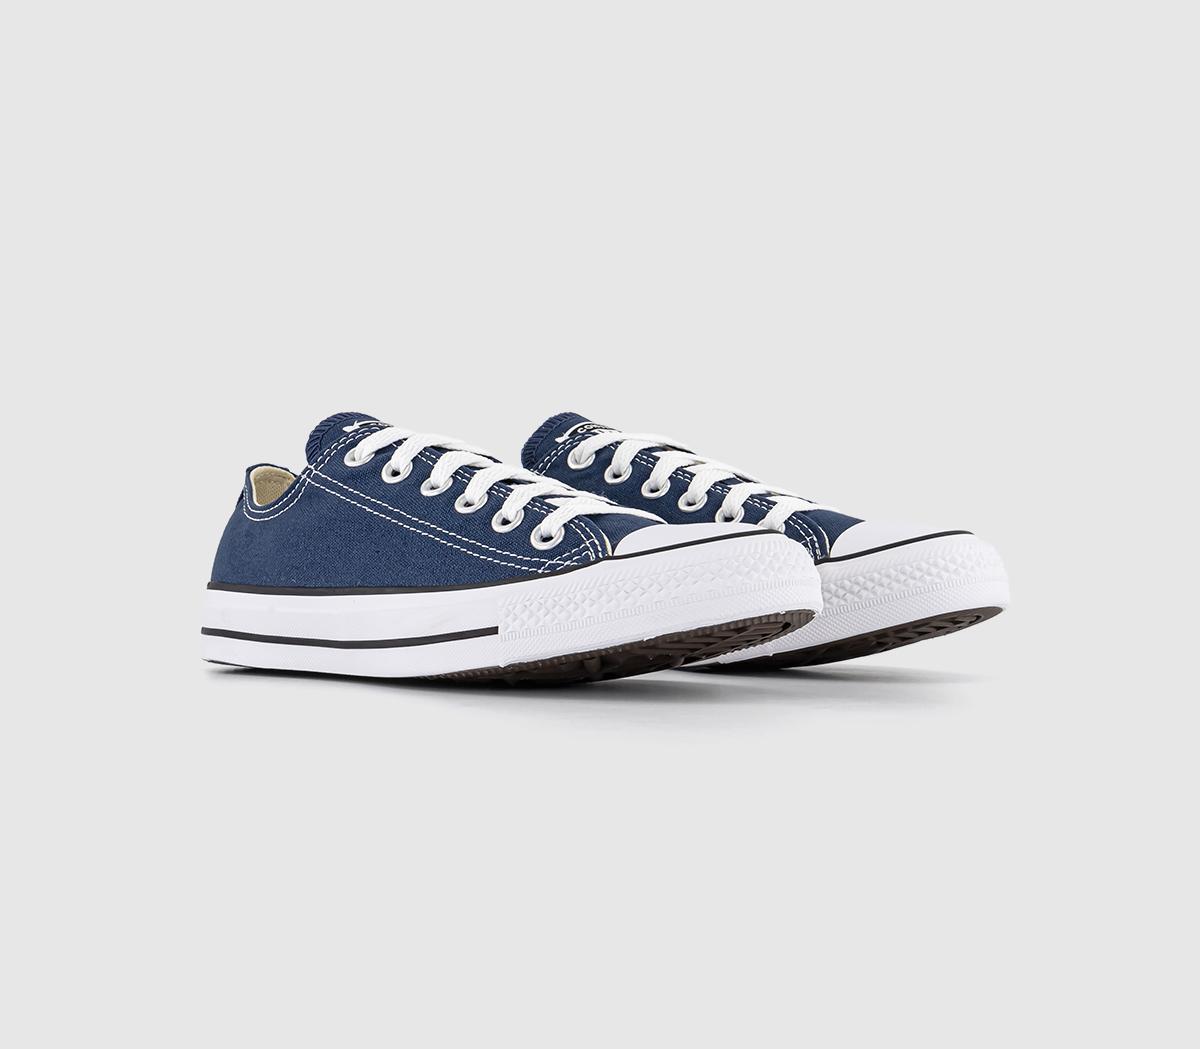 Converse Mens All Star Low Navy Canvas Trainers In Blue / White, 7.5